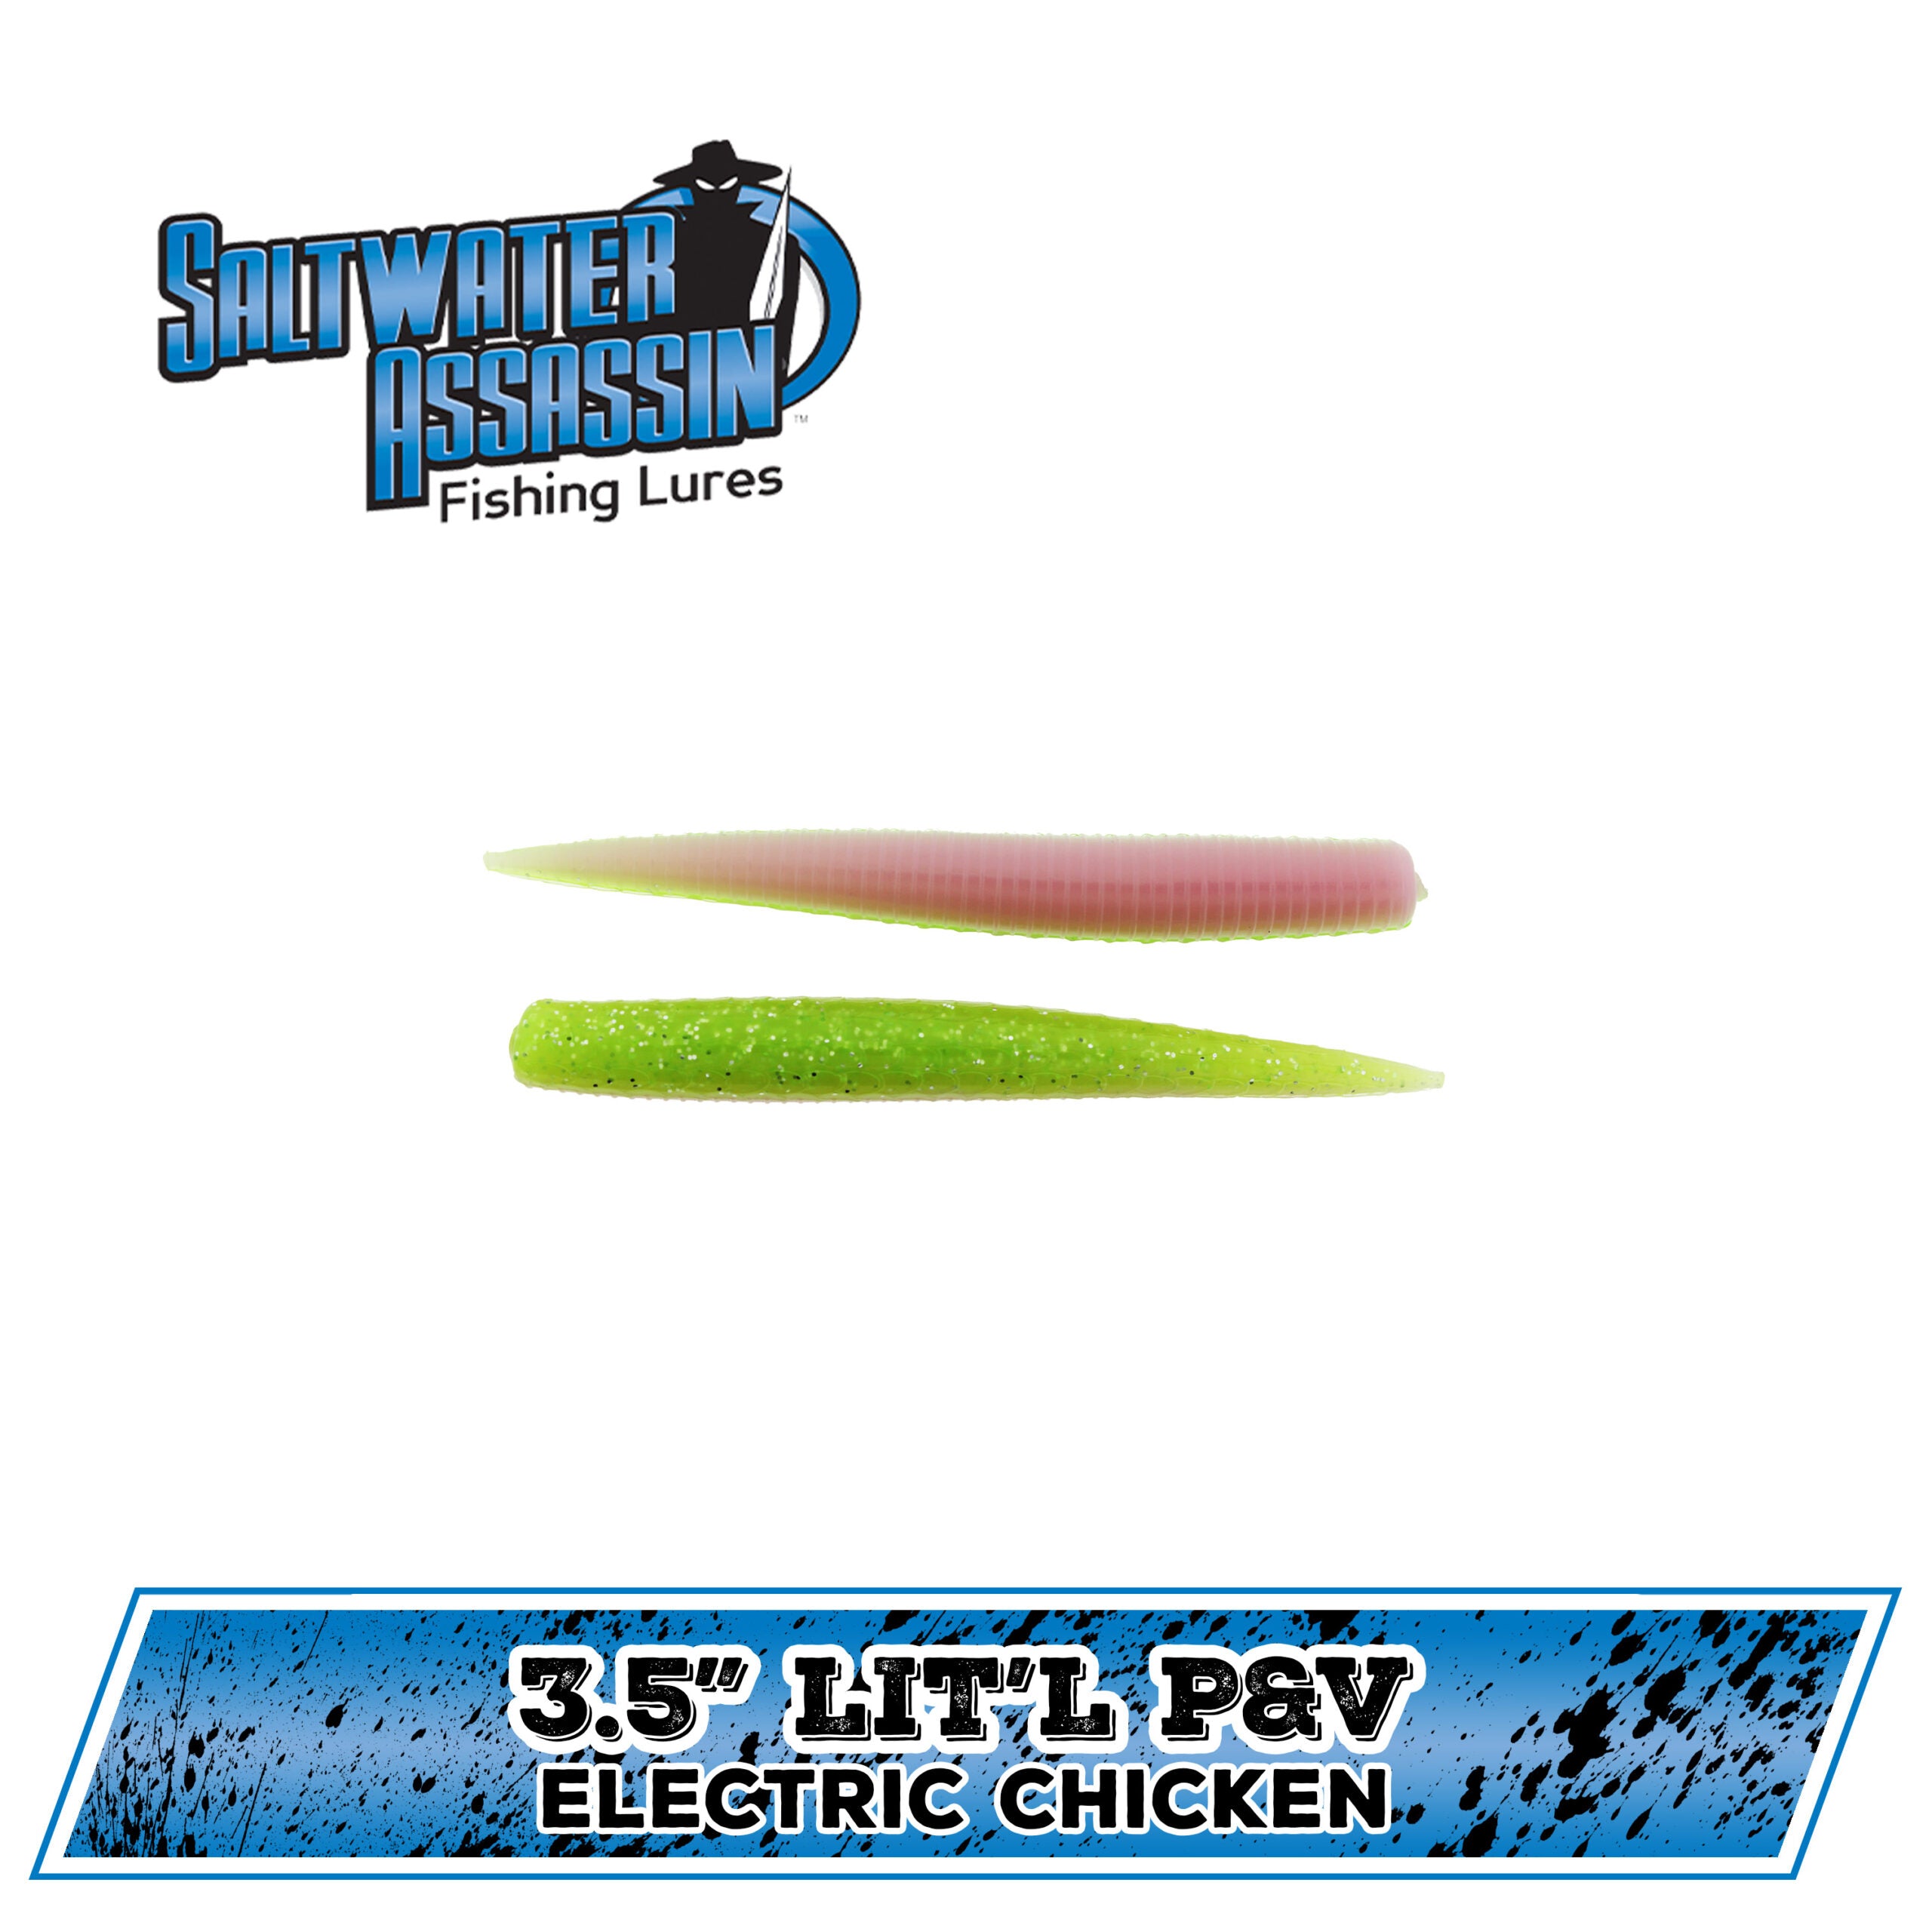 Bass Assassin Lures, Inc. - Color Spotlight! Check out our